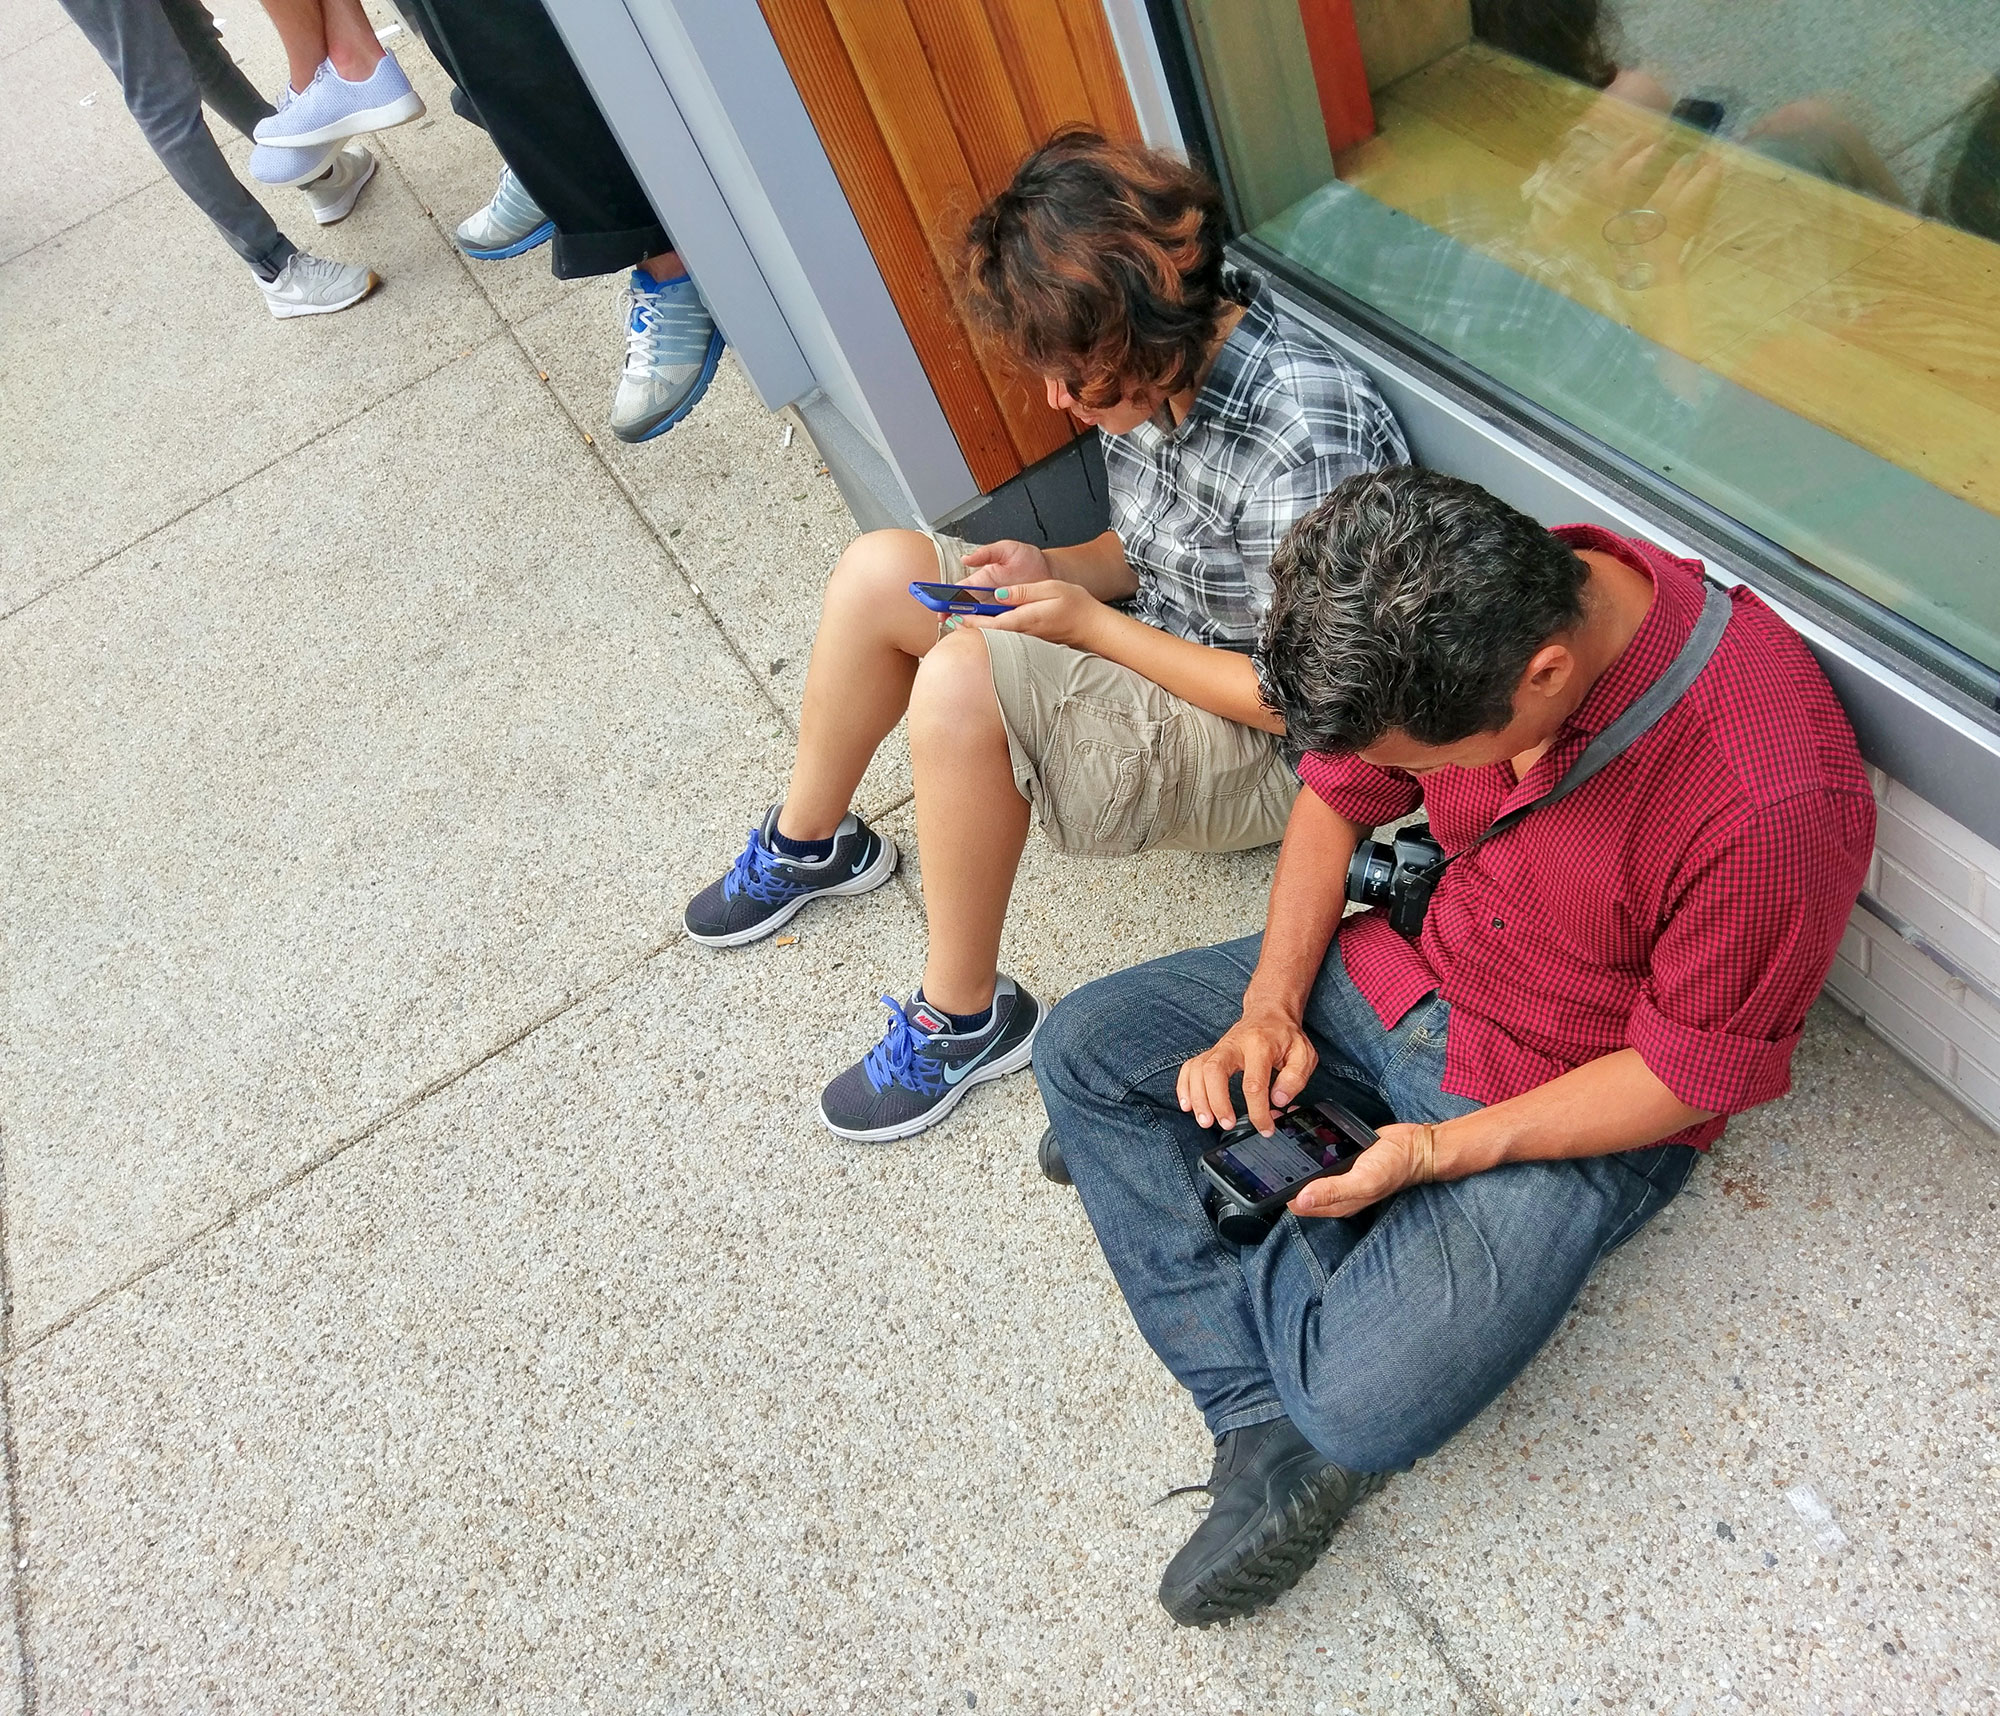 Festival-goers busy on their phones on H Street.